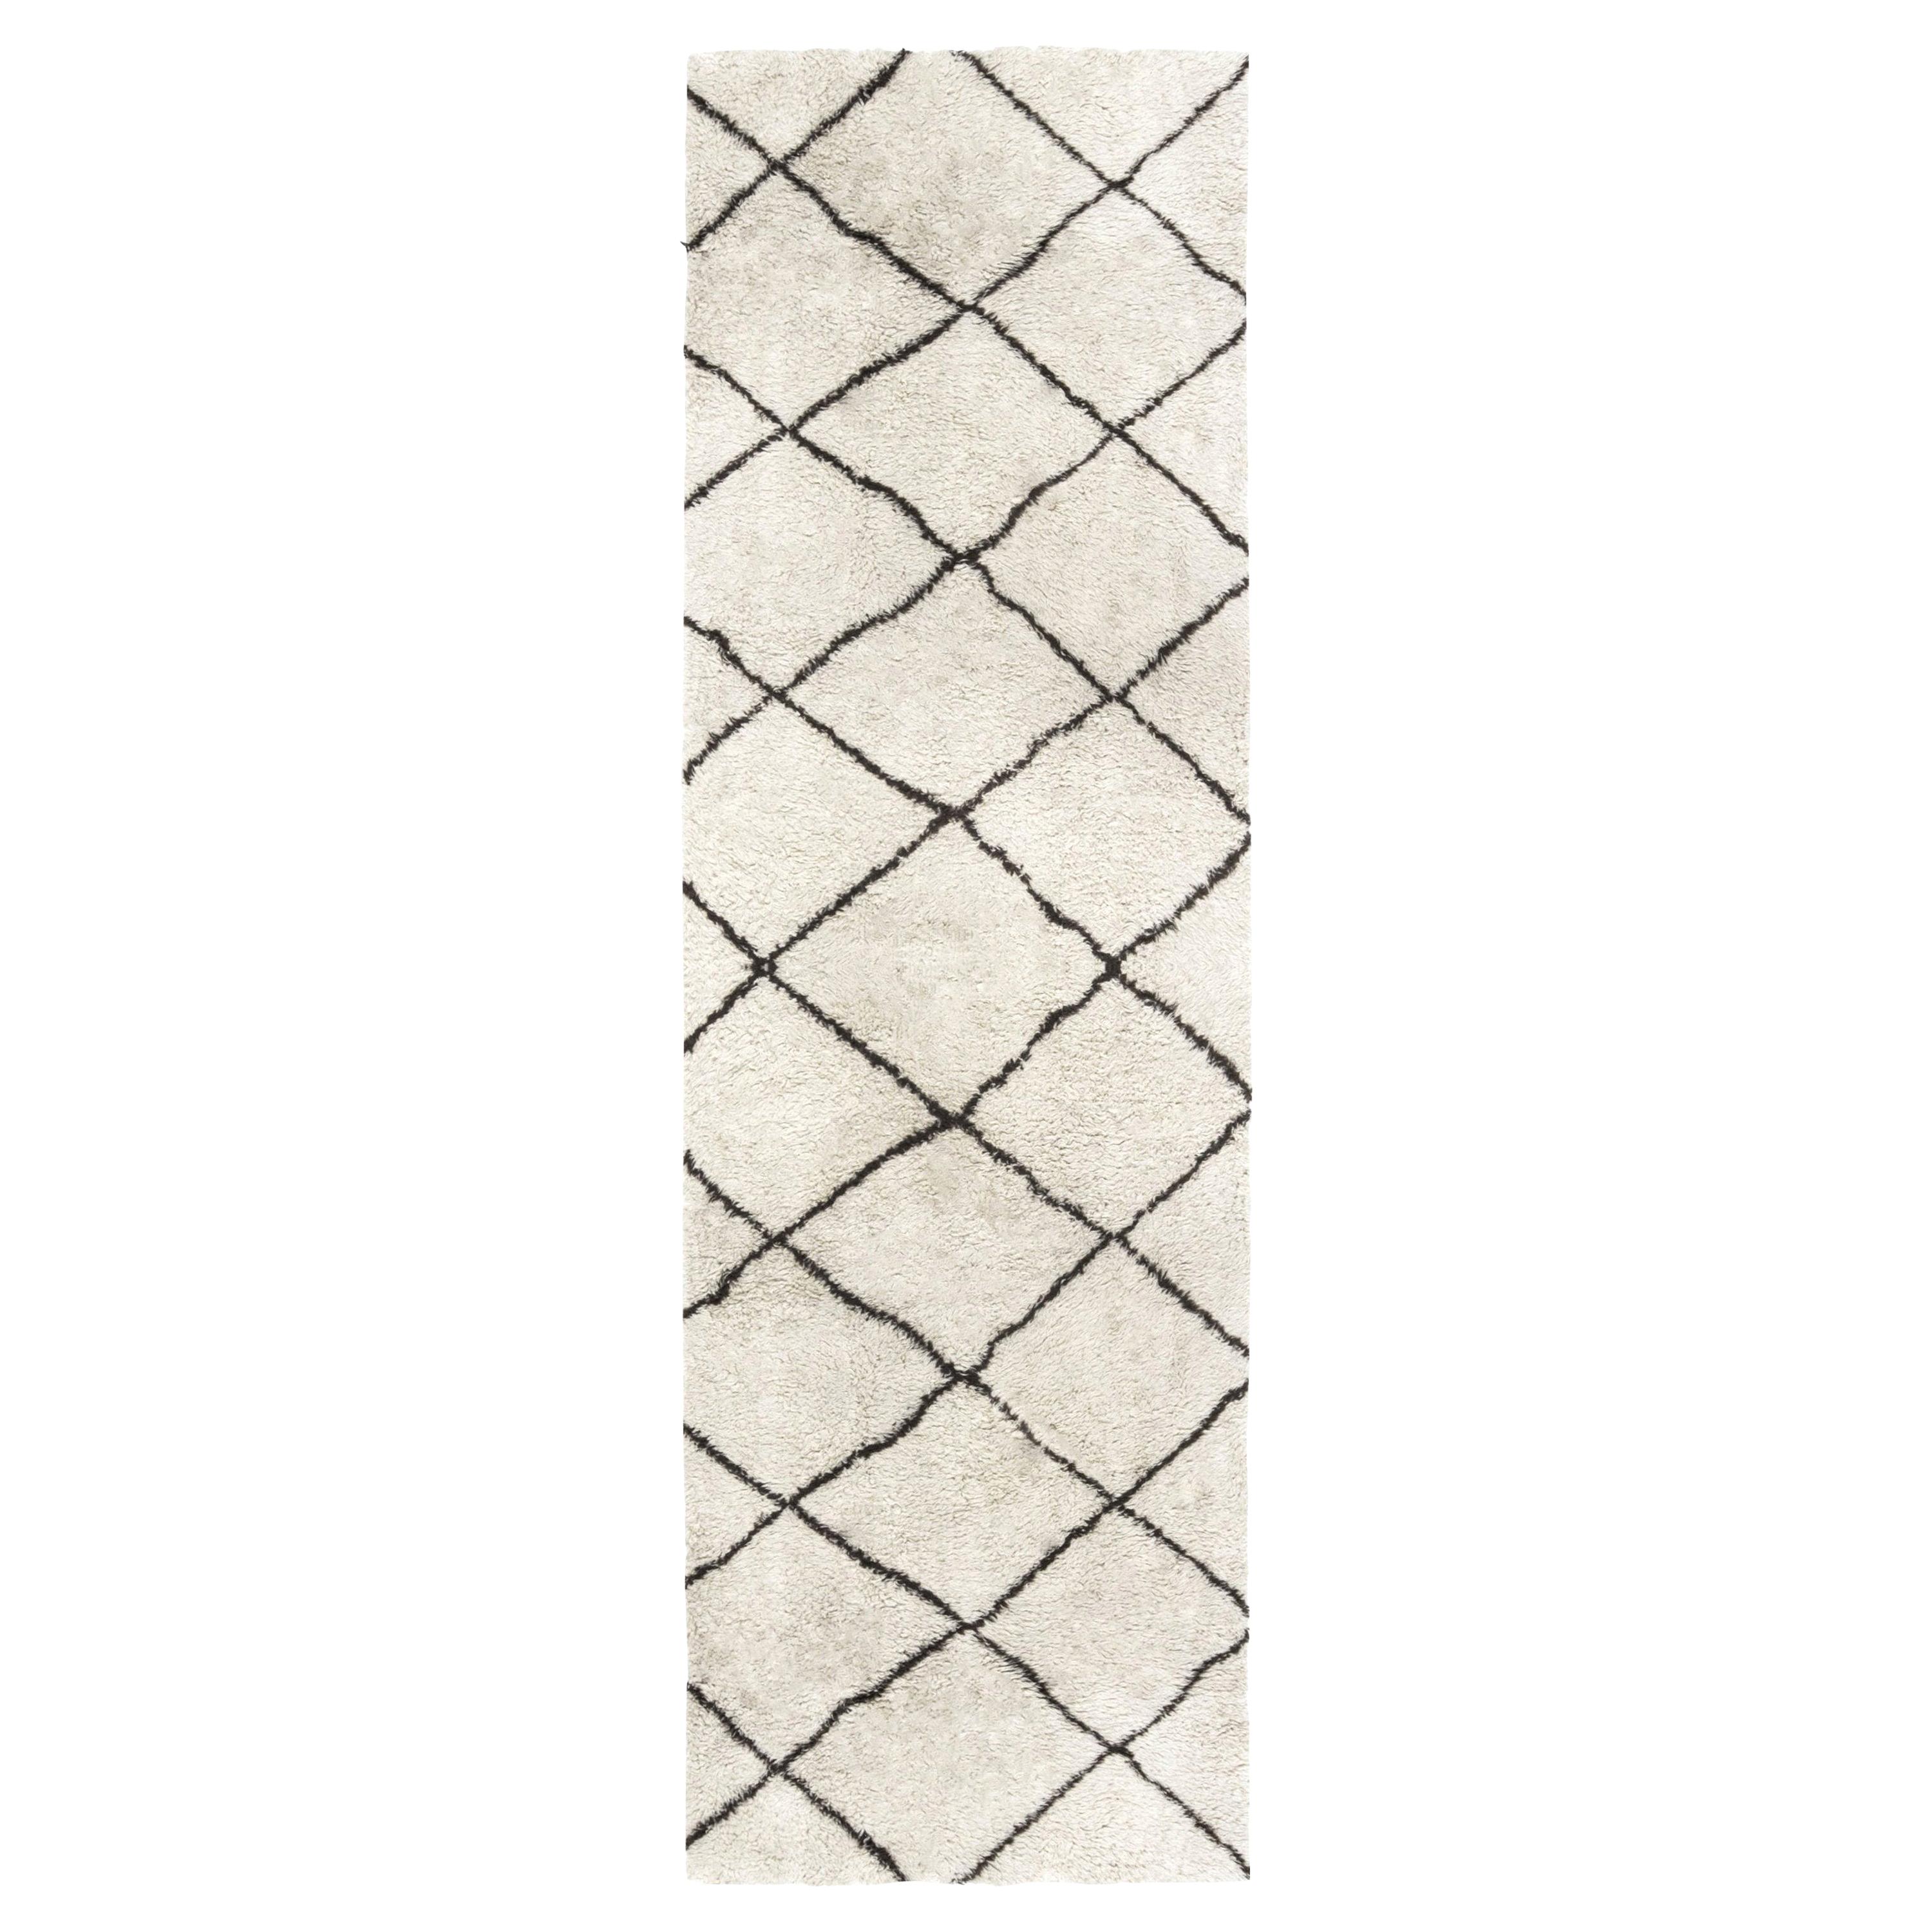 Moroccan Wool Runner with Tribal Geometric Design in Black and White